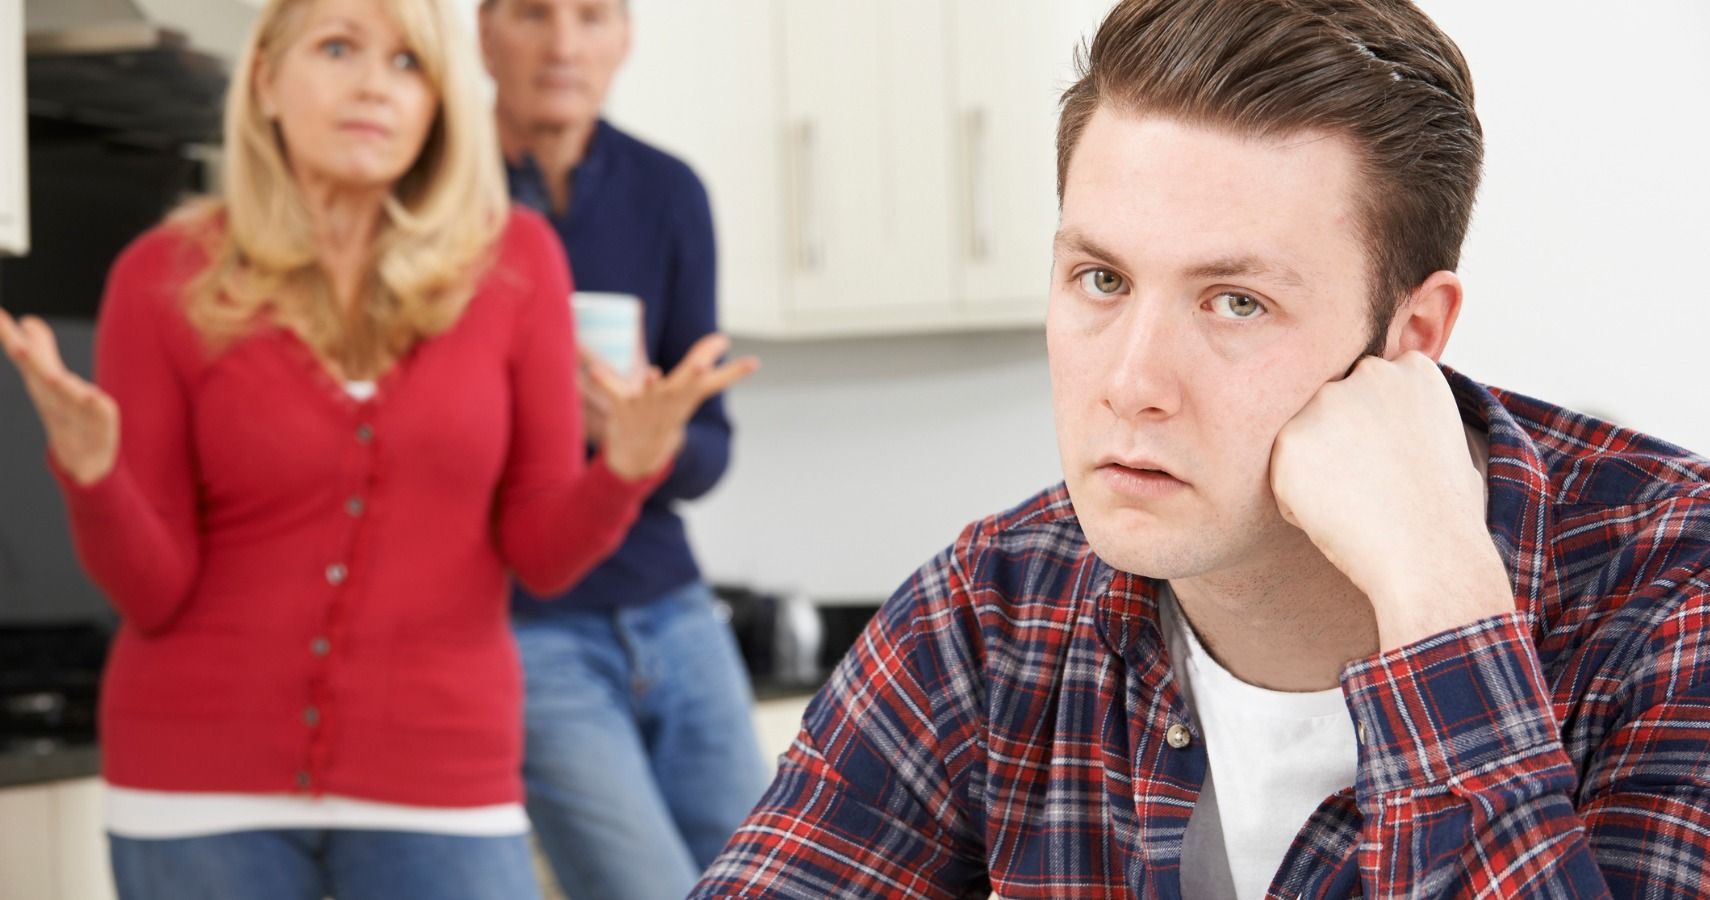 parents annoyed with adult son